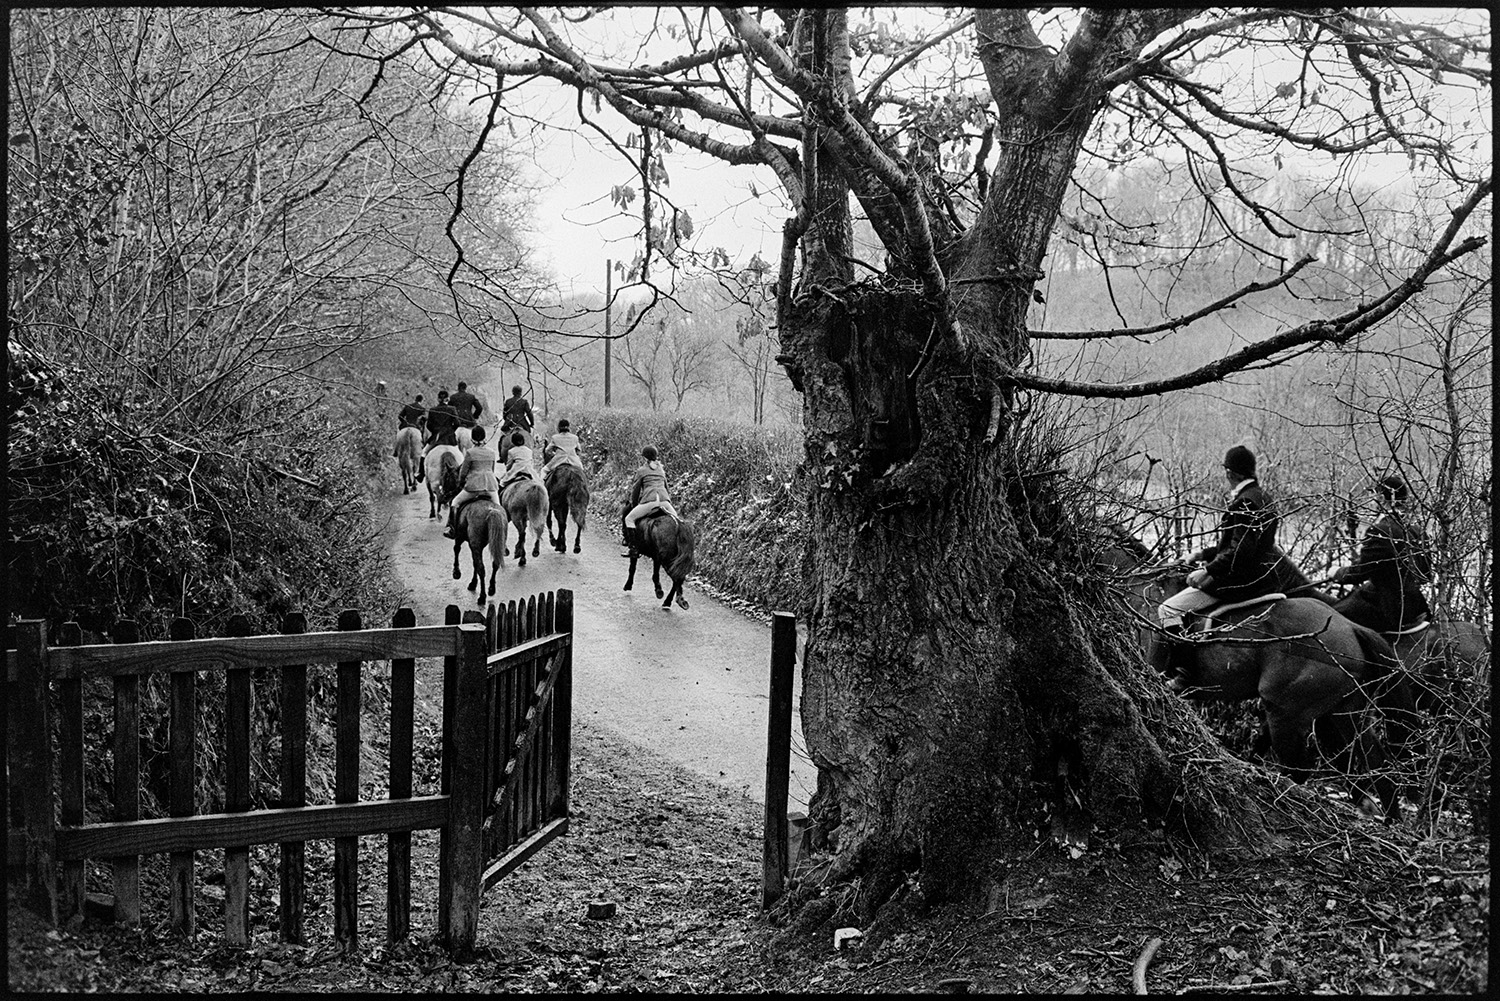 Hunt meet in village, setting off. 
[Horse riders setting off down a lane in Dolton on a hunt. An open wooden gate by a large tree trunk can be seen in the foreground.]